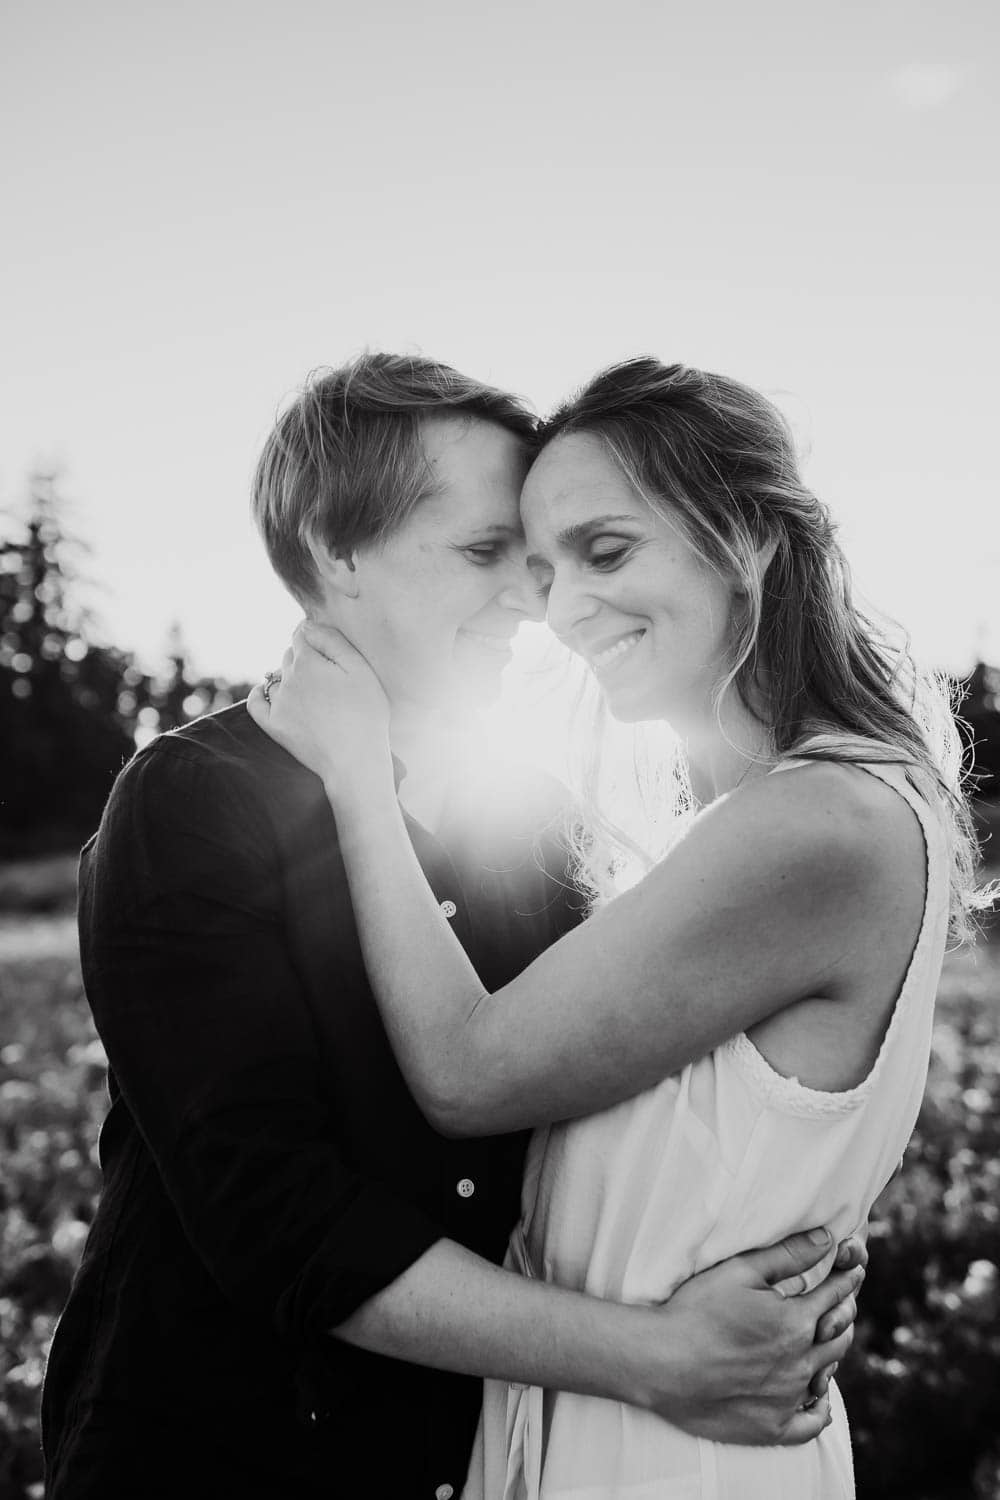 black and white image of a couple embracing